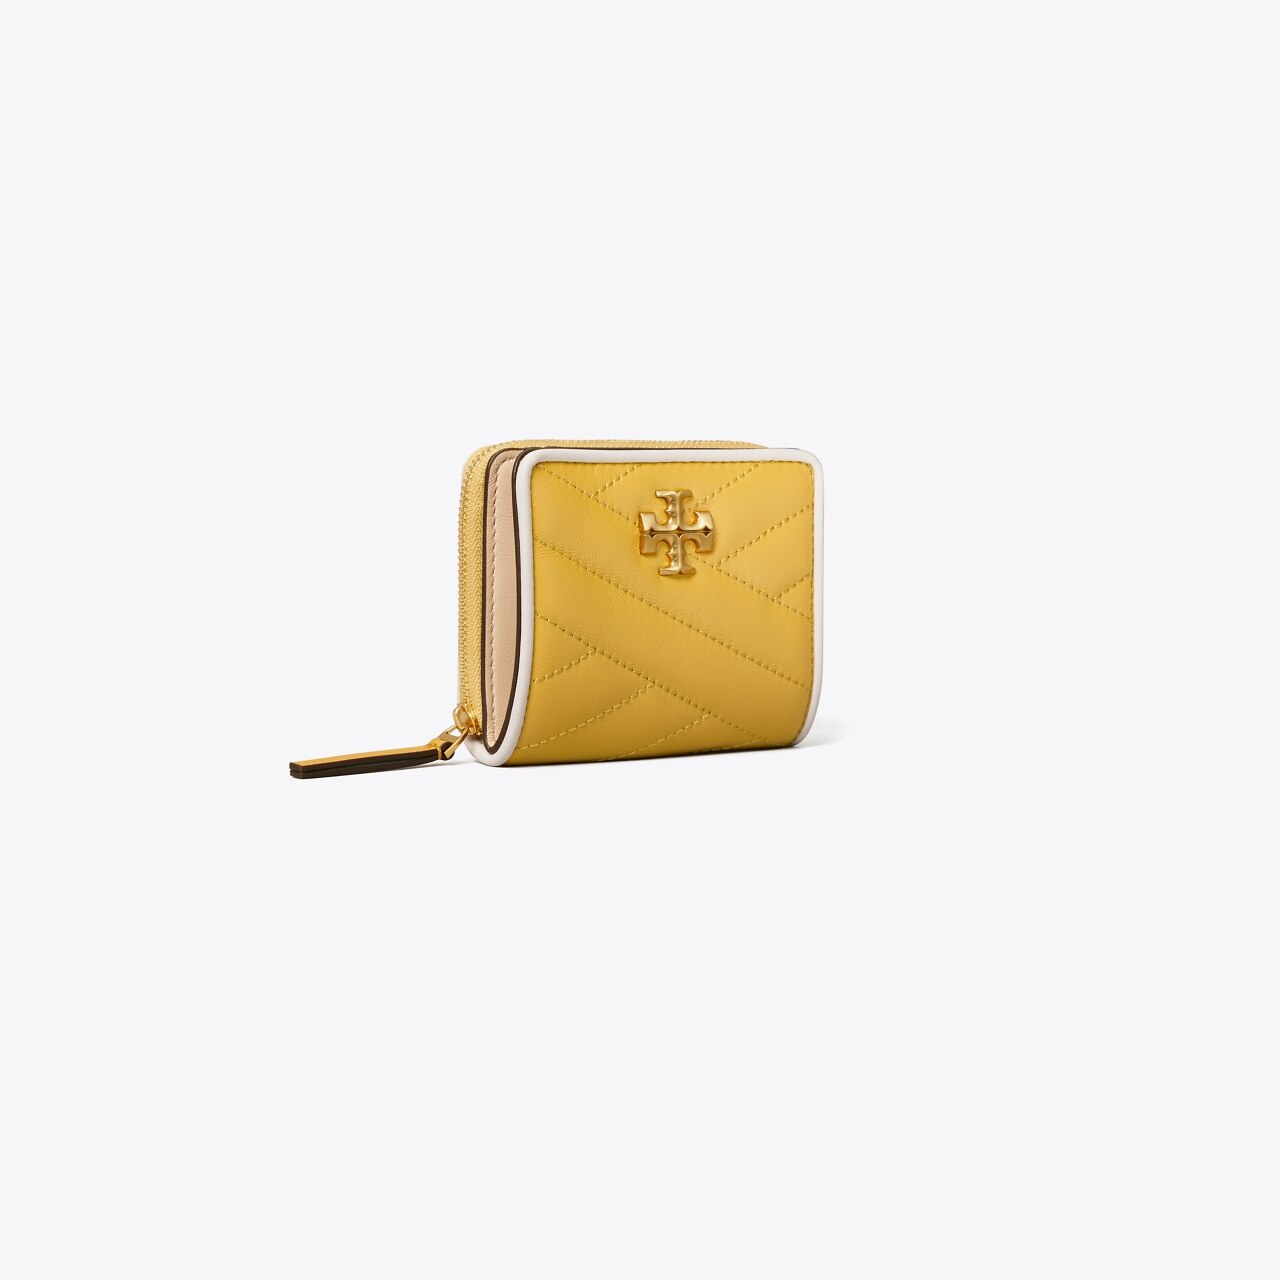 Only 79.20 usd for Tory Burch Kira Chevron Powder Coated Bi-Fold Wallet  Online at the Shop